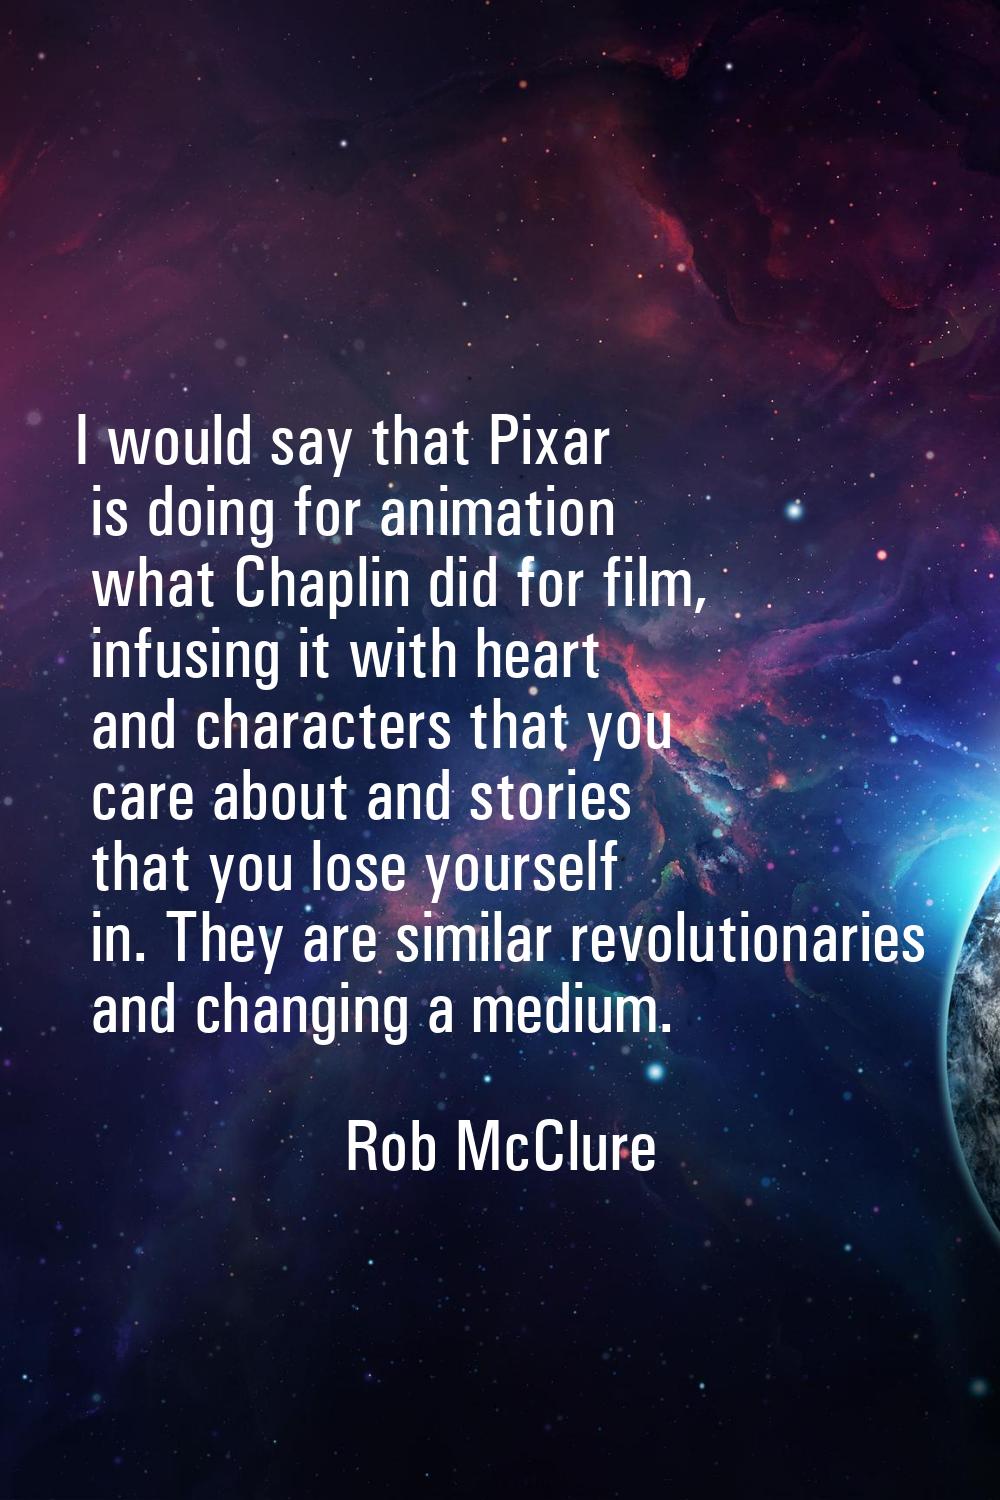 I would say that Pixar is doing for animation what Chaplin did for film, infusing it with heart and